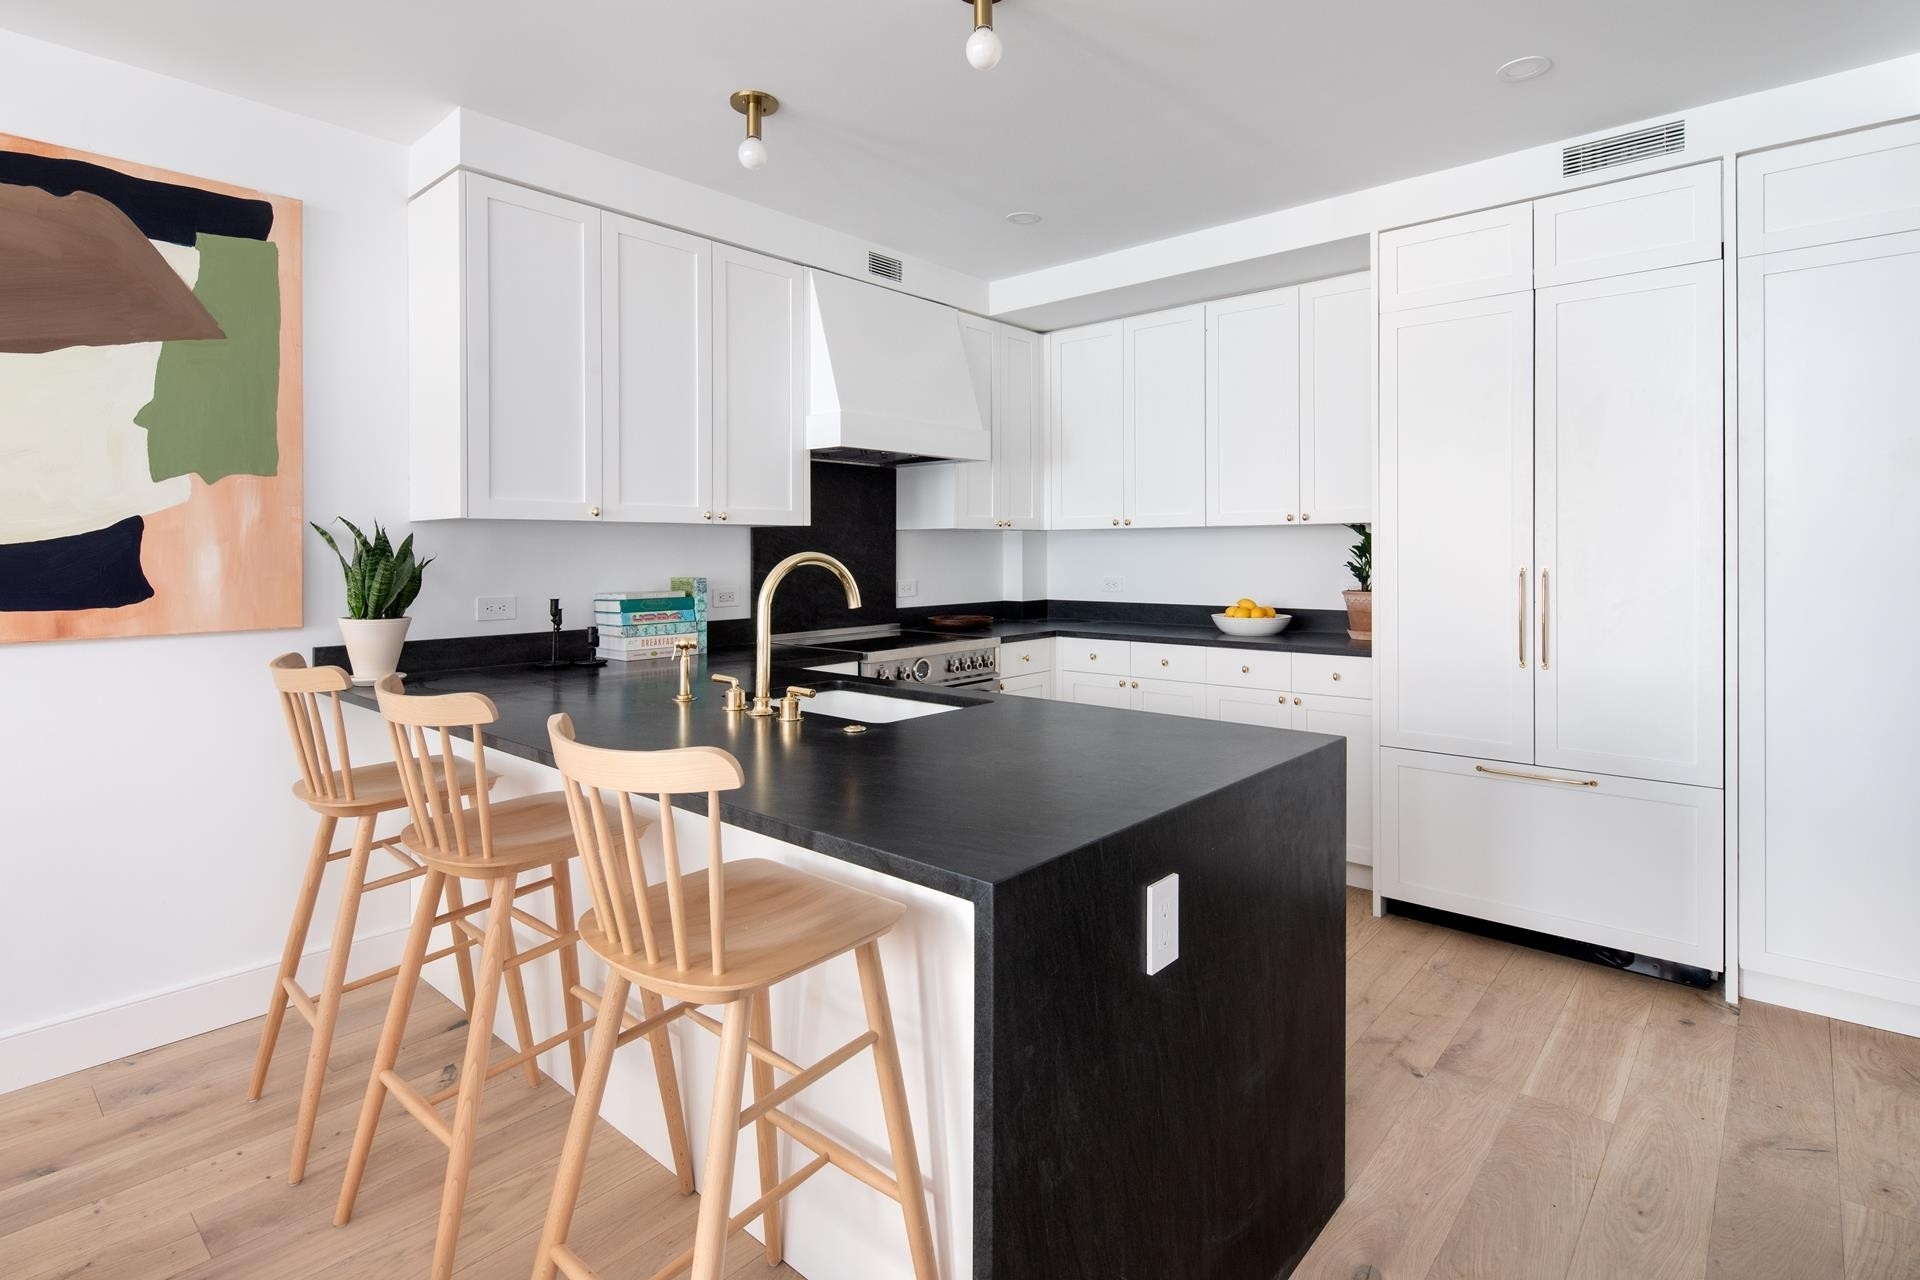 3. Condominiums for Sale at The Butler Collecti, 350 BUTLER ST, 3B Park Slope, Brooklyn, NY 11217